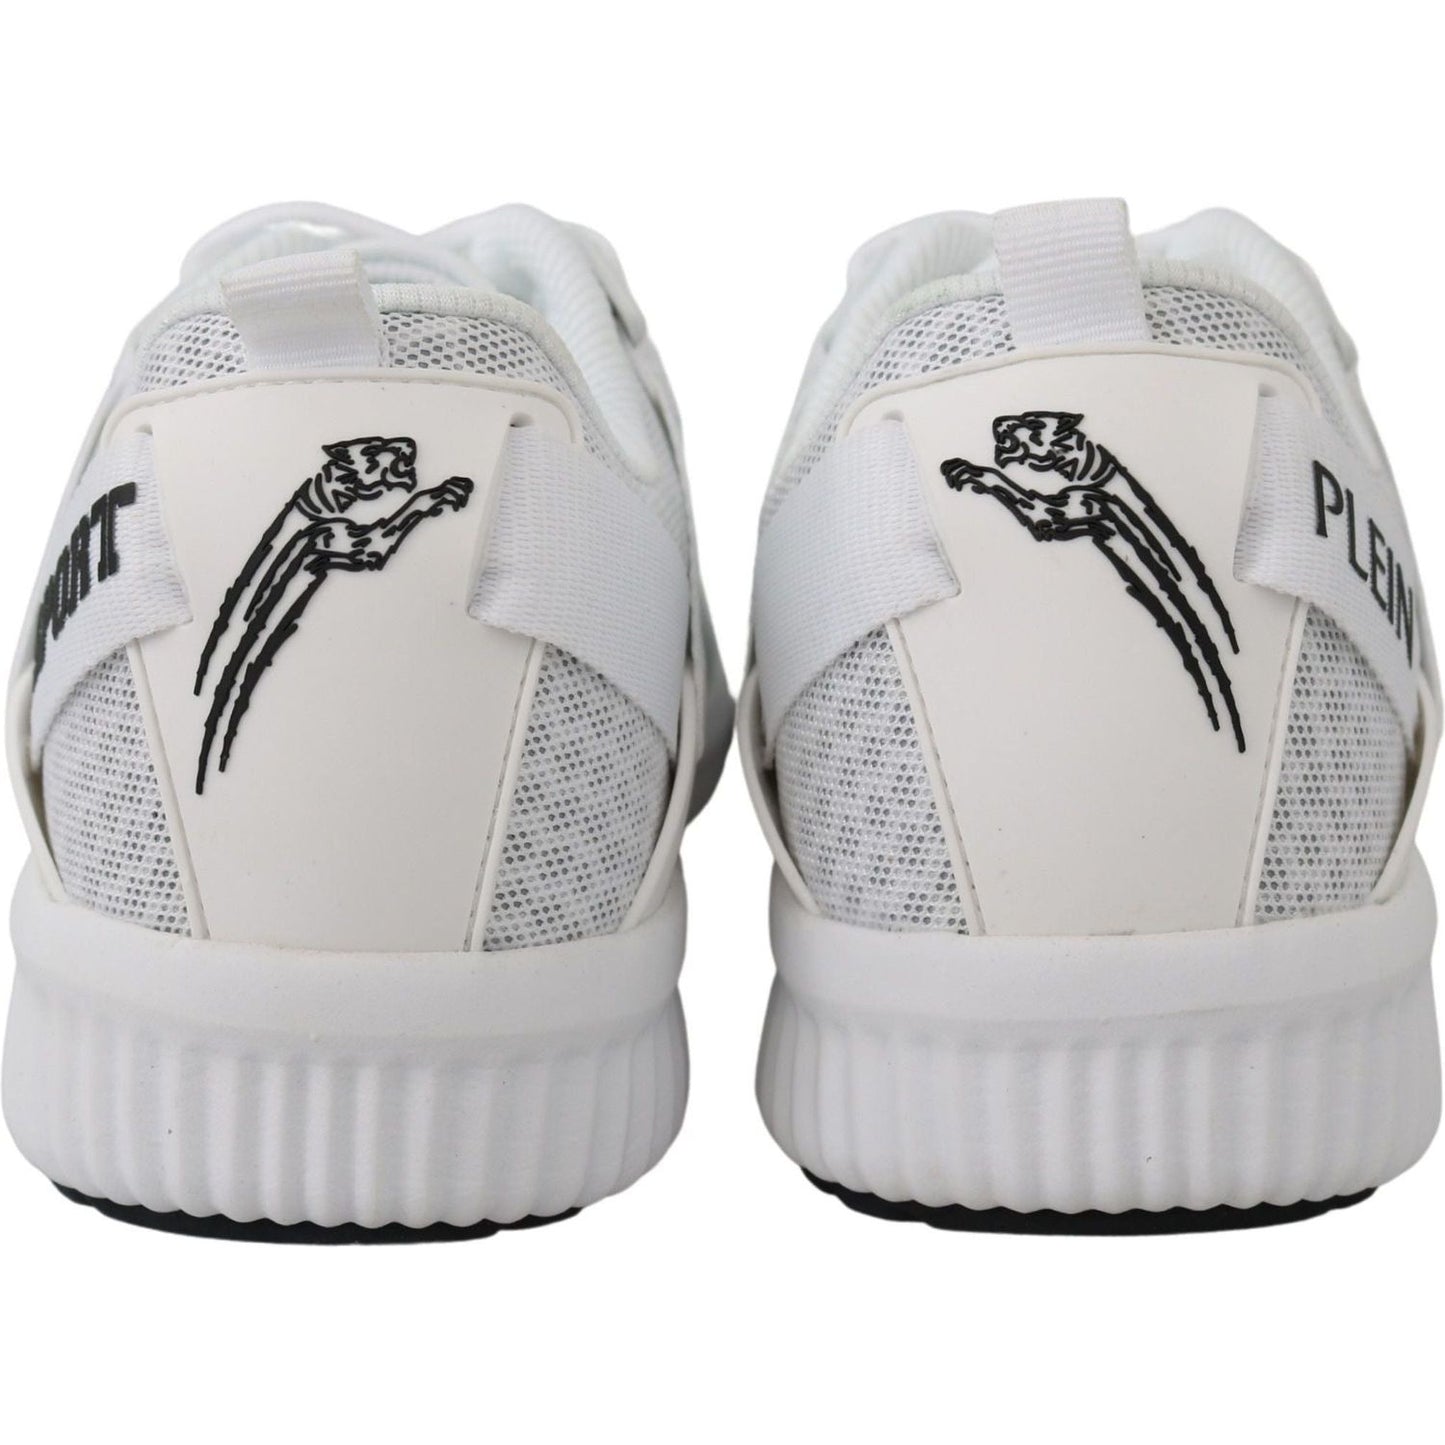 Plein Sport Exquisite Plein Sport Sneakers for Men white-polyester-adrian-sneakers-shoes